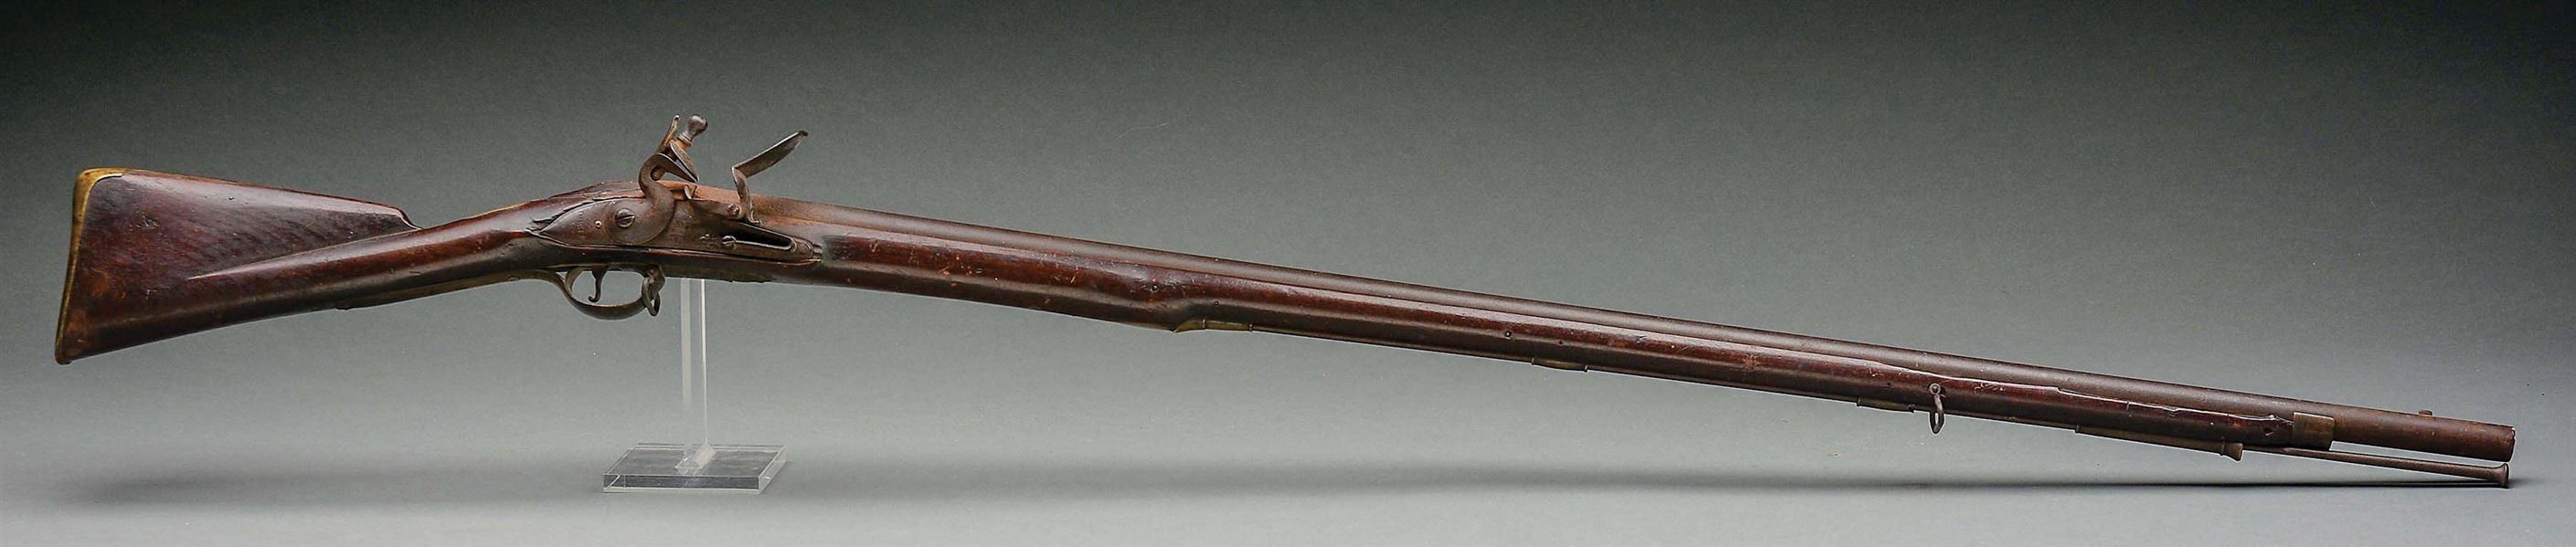 (A) HISTORIC SARATOGA USED BRITISH 1ST MODEL 1756 BROWN BESS INSCRIBED TO THE ROYAL NORTH BRITISH FUSILIERS, 21ST REGIMENT.